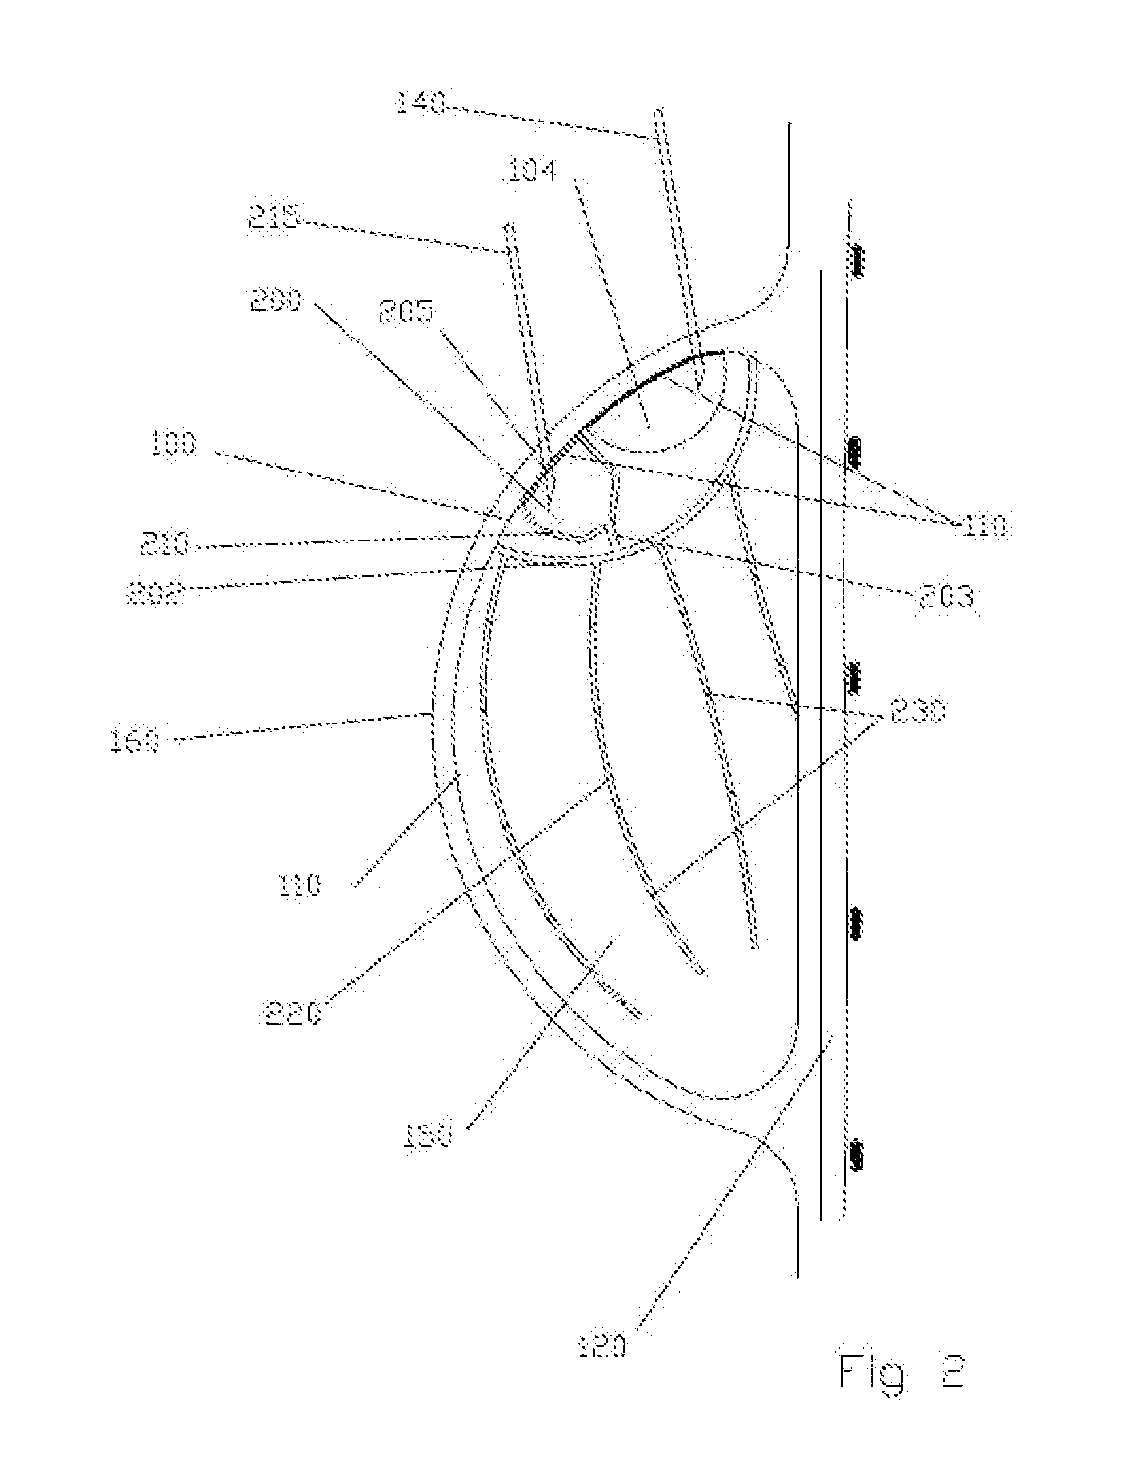 Tissue Expander with Means to Deliver Antibiotics or Medication Uniformly on its Surface Using Multiple Channels Comprising Pores